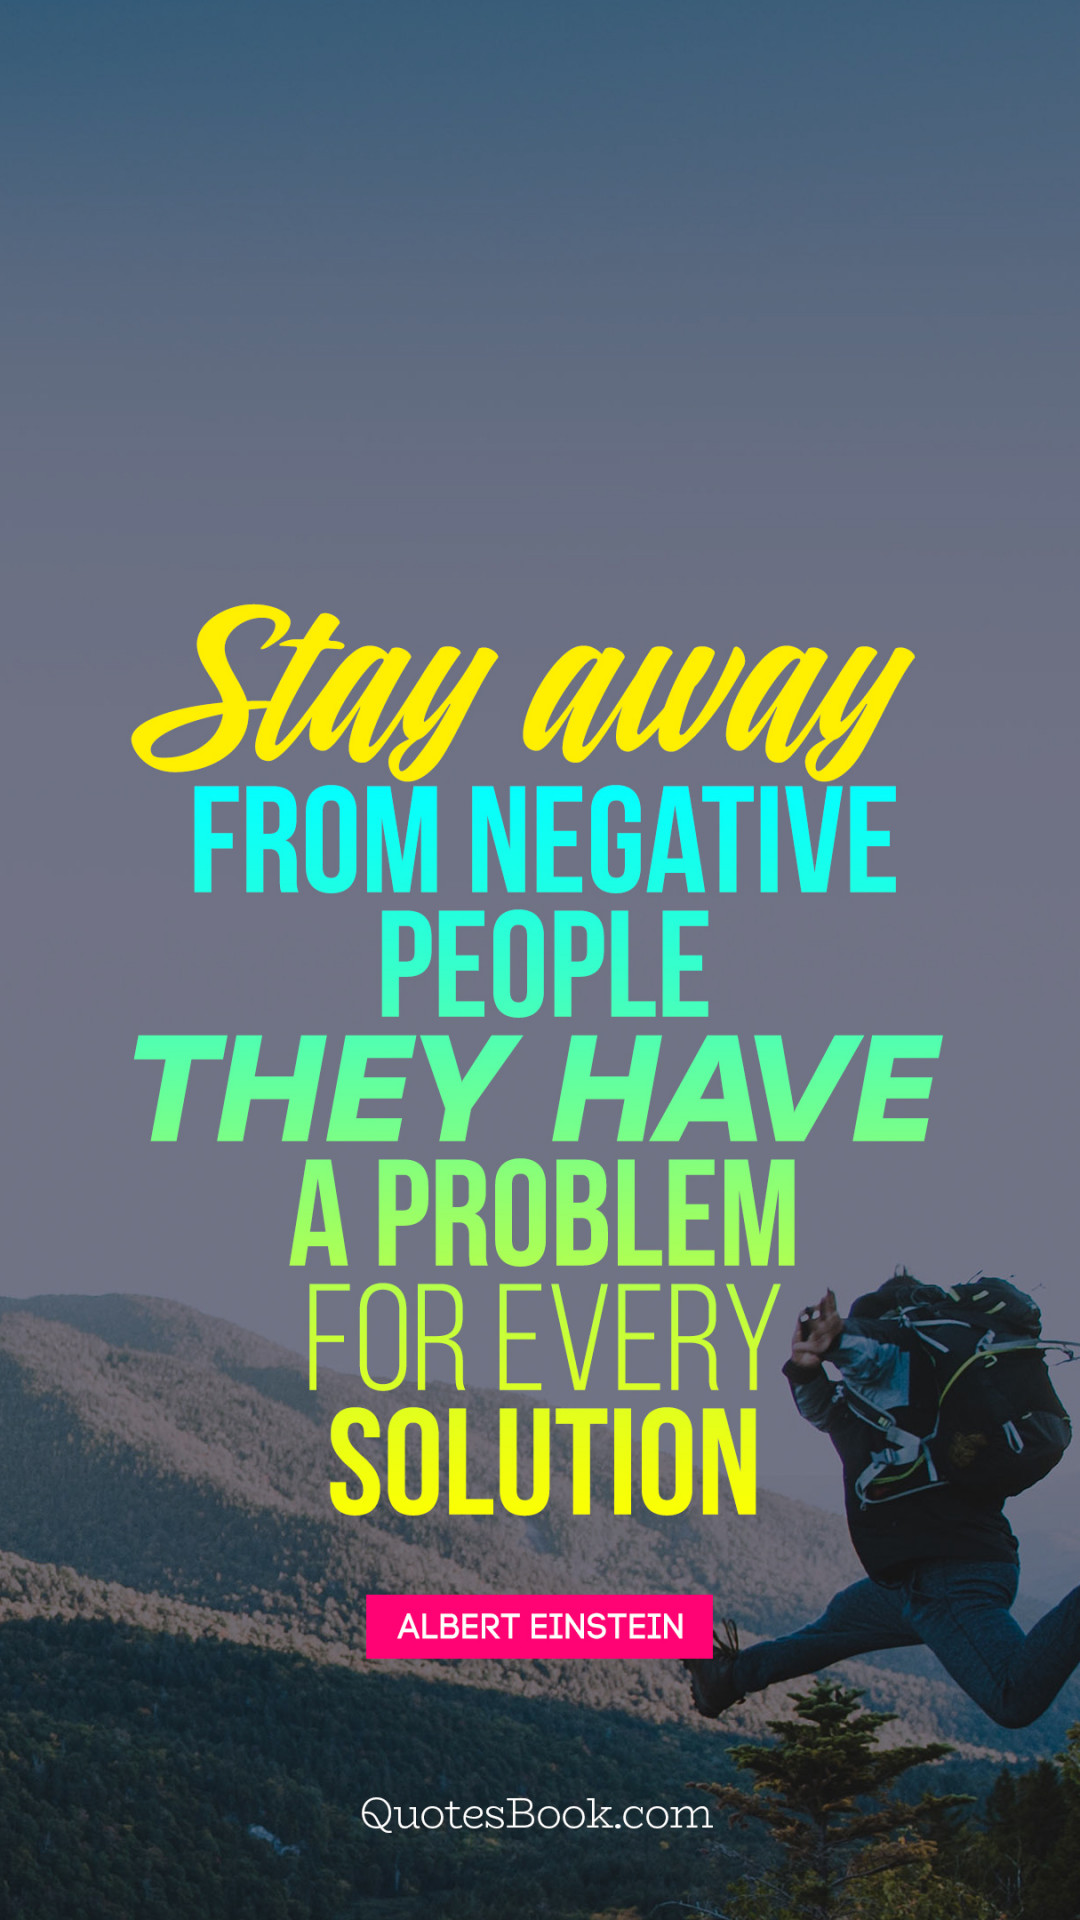 Stay away from negative people. They have a problem for